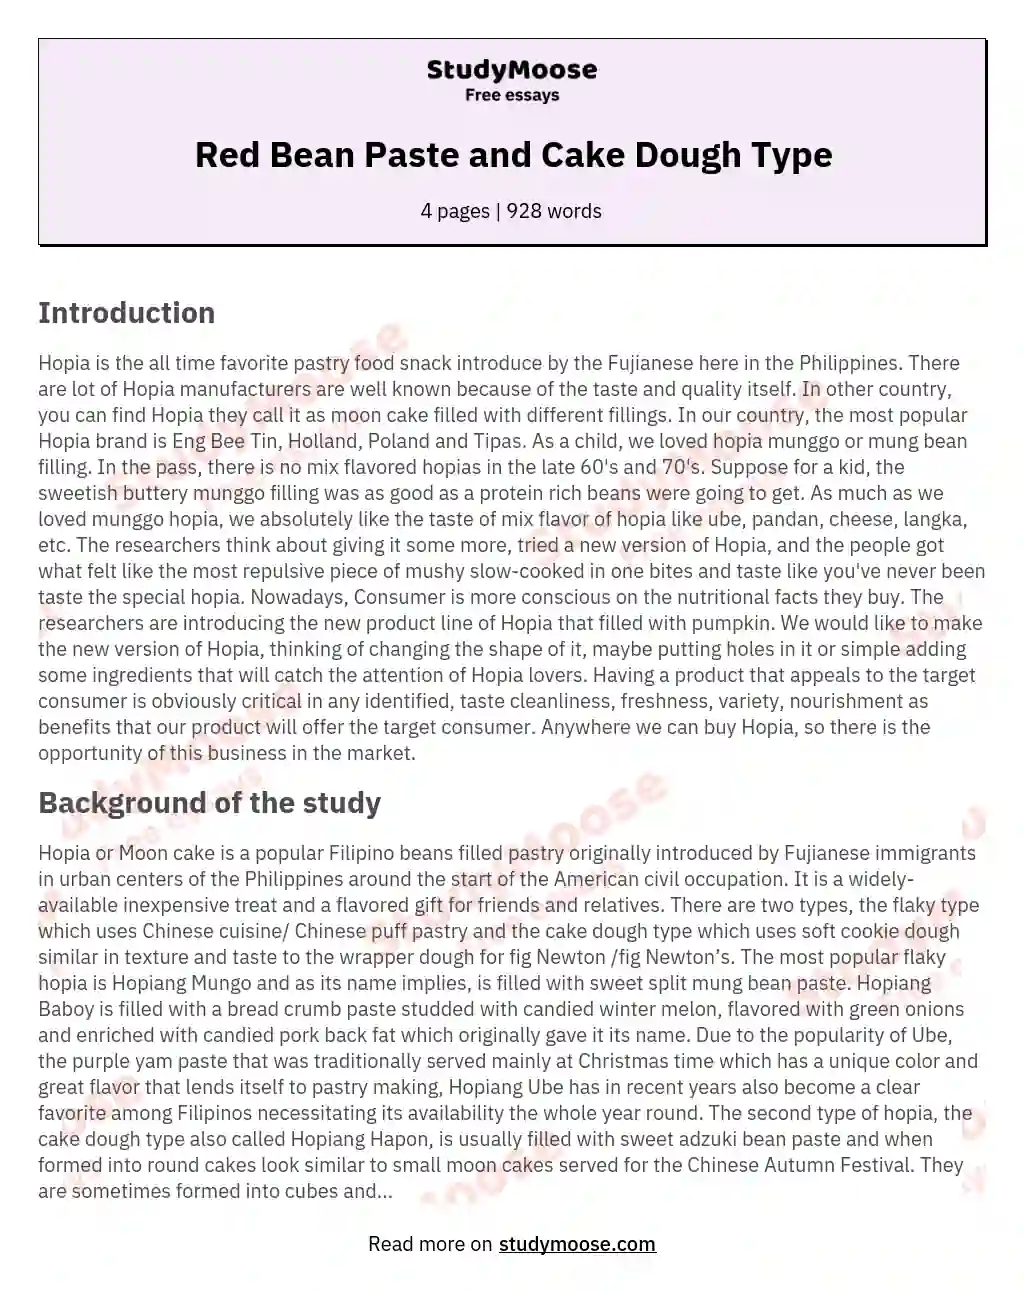 Red Bean Paste and Cake Dough Type essay